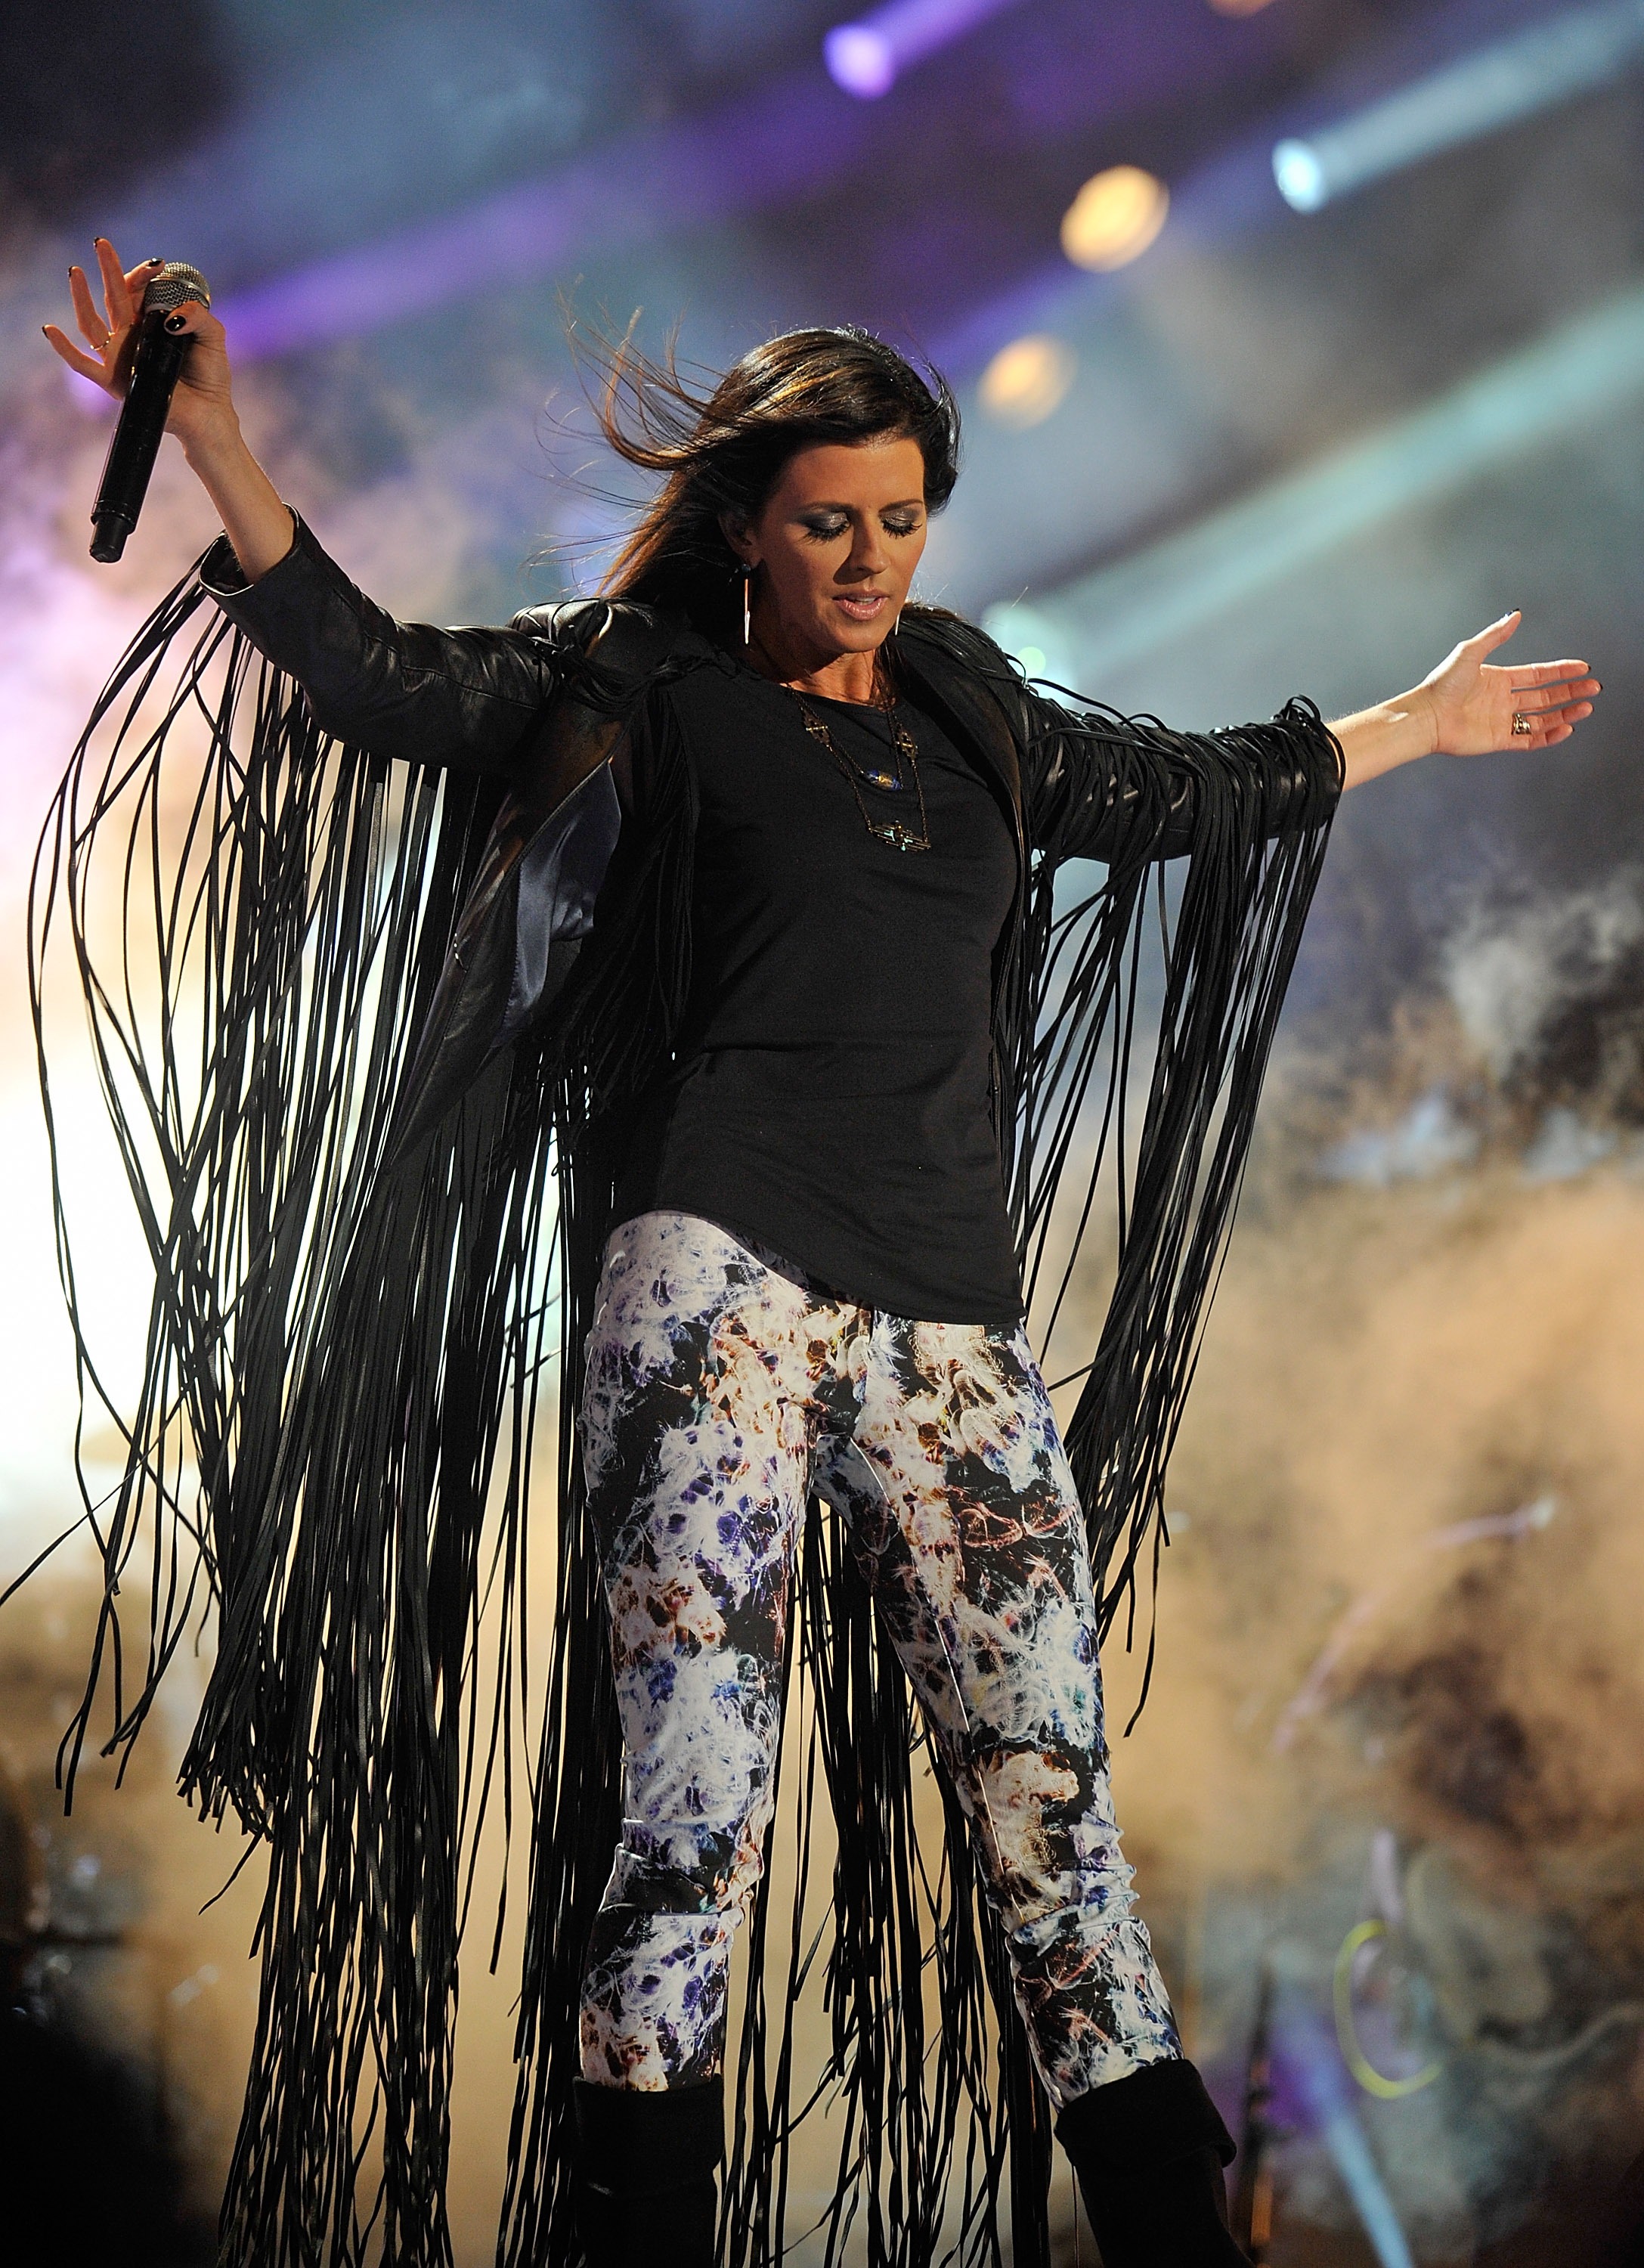 Karen Fairchild of Little Big Town performs at LP Field during the 2013 CMA Music Festival on June 7, 2013 in Nashville, Tennessee.